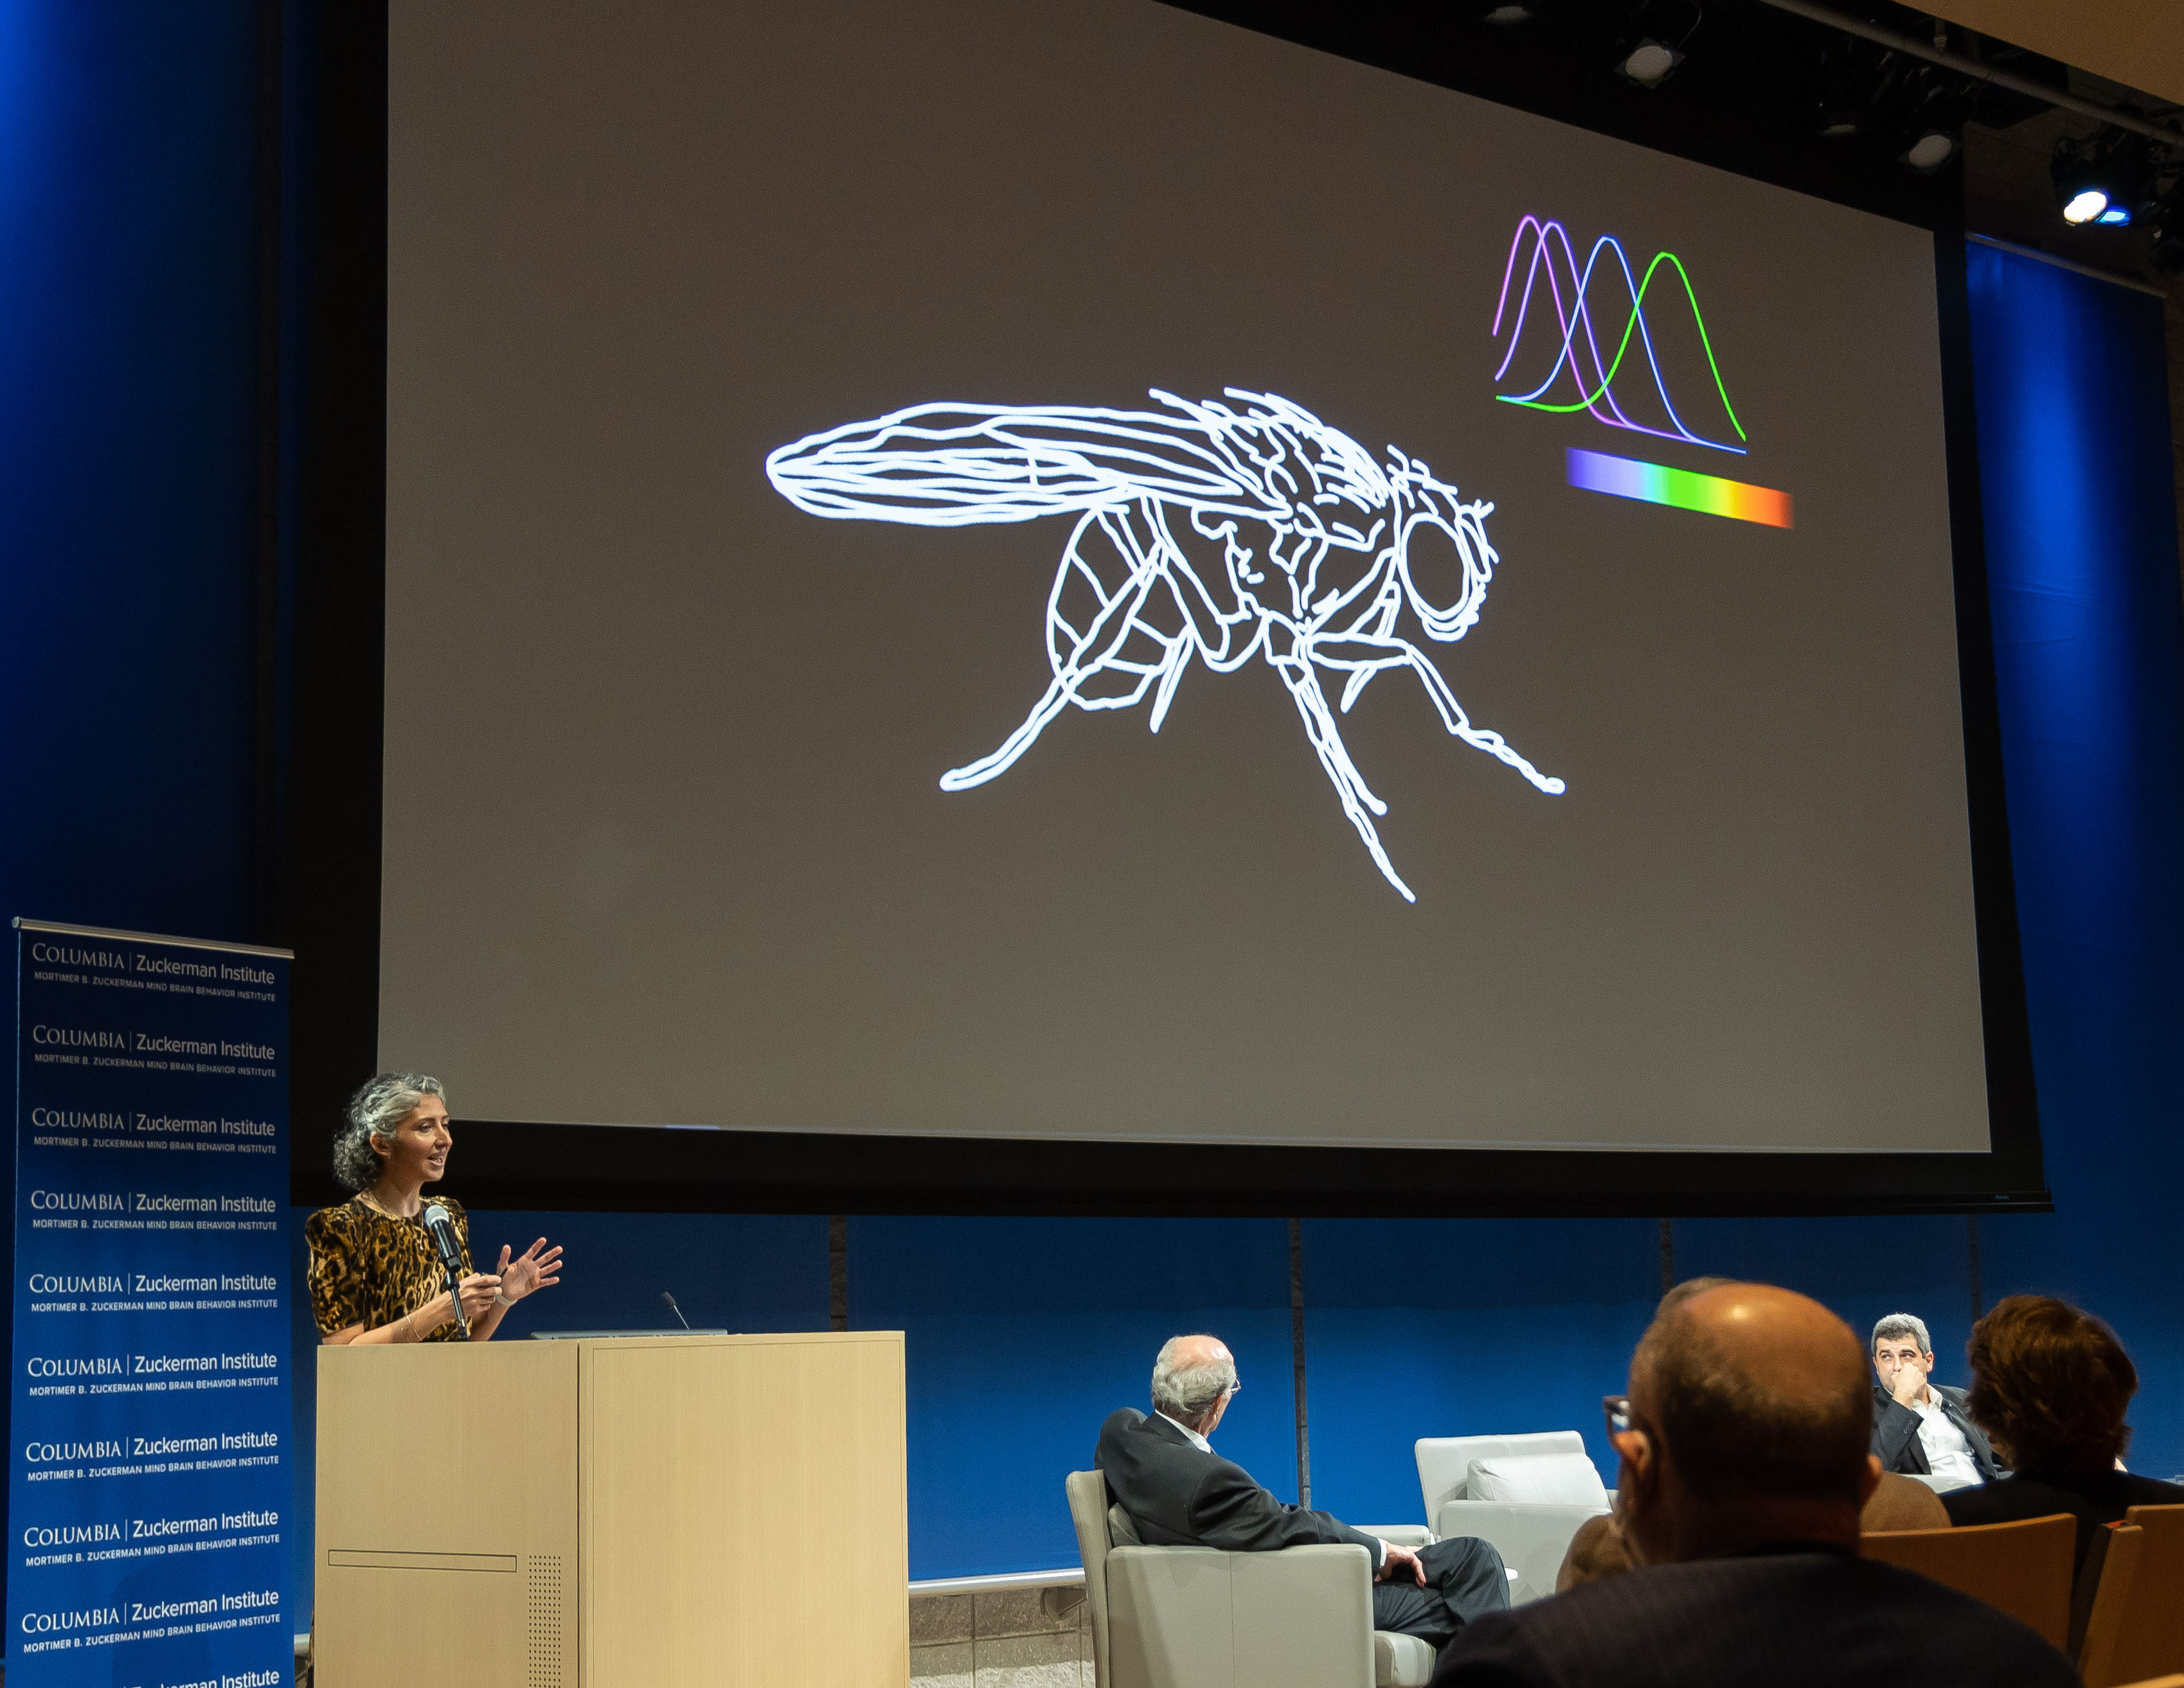 Dr. Rudy Behnia explains how her fruit-fly studies are helping uncover the biology of color vision